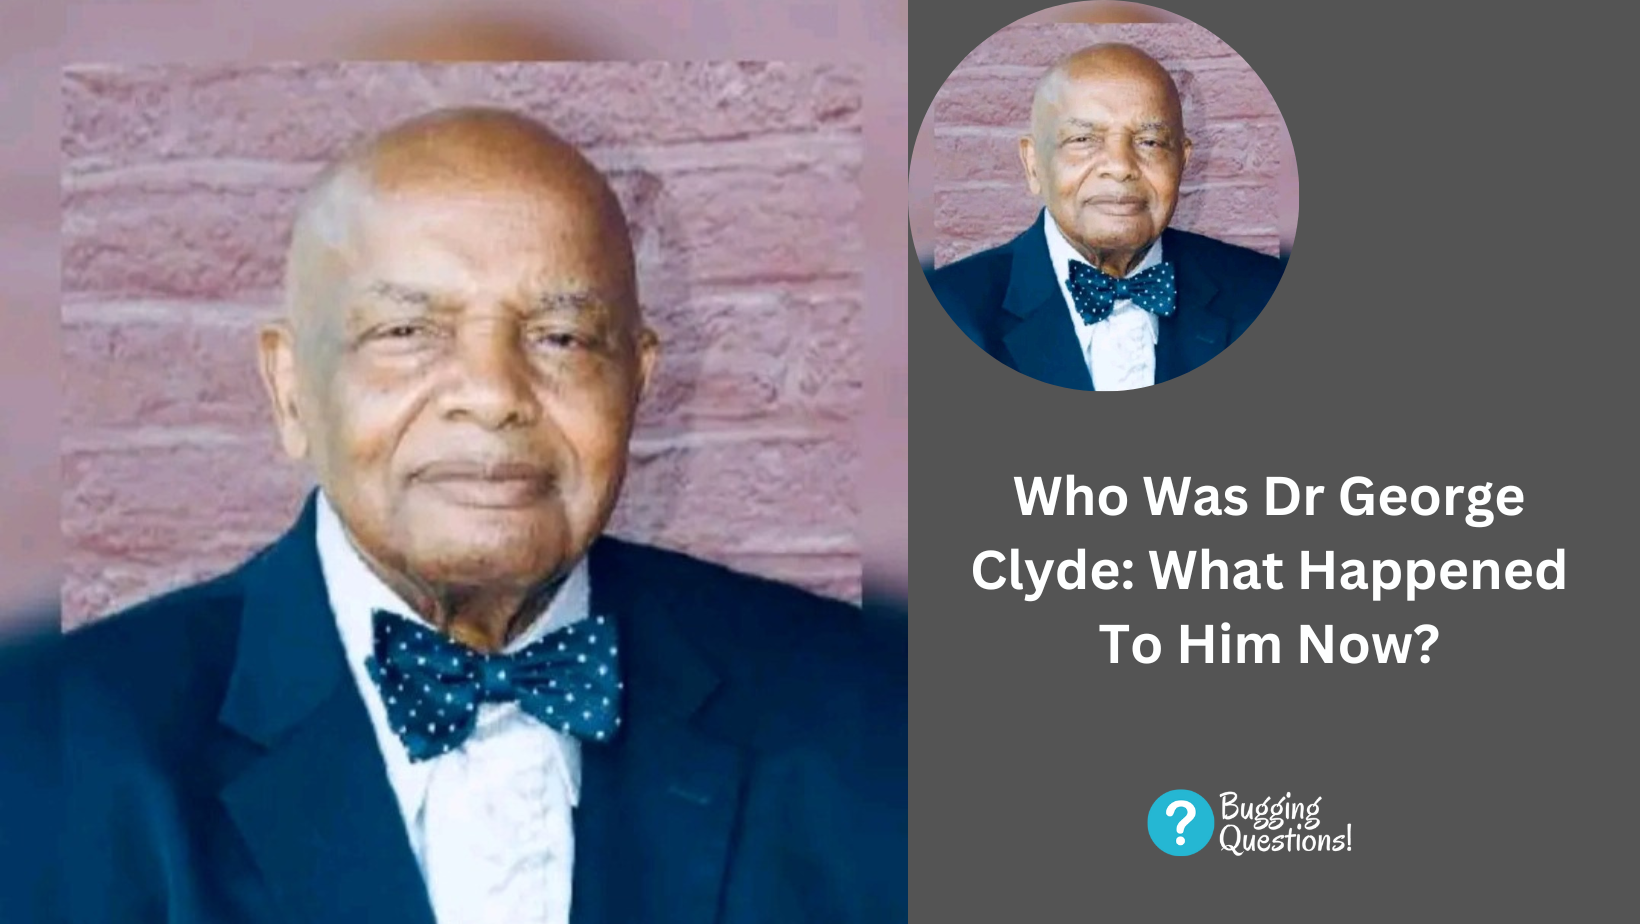 Who Was Dr George Clyde: What Happened To Him Now?